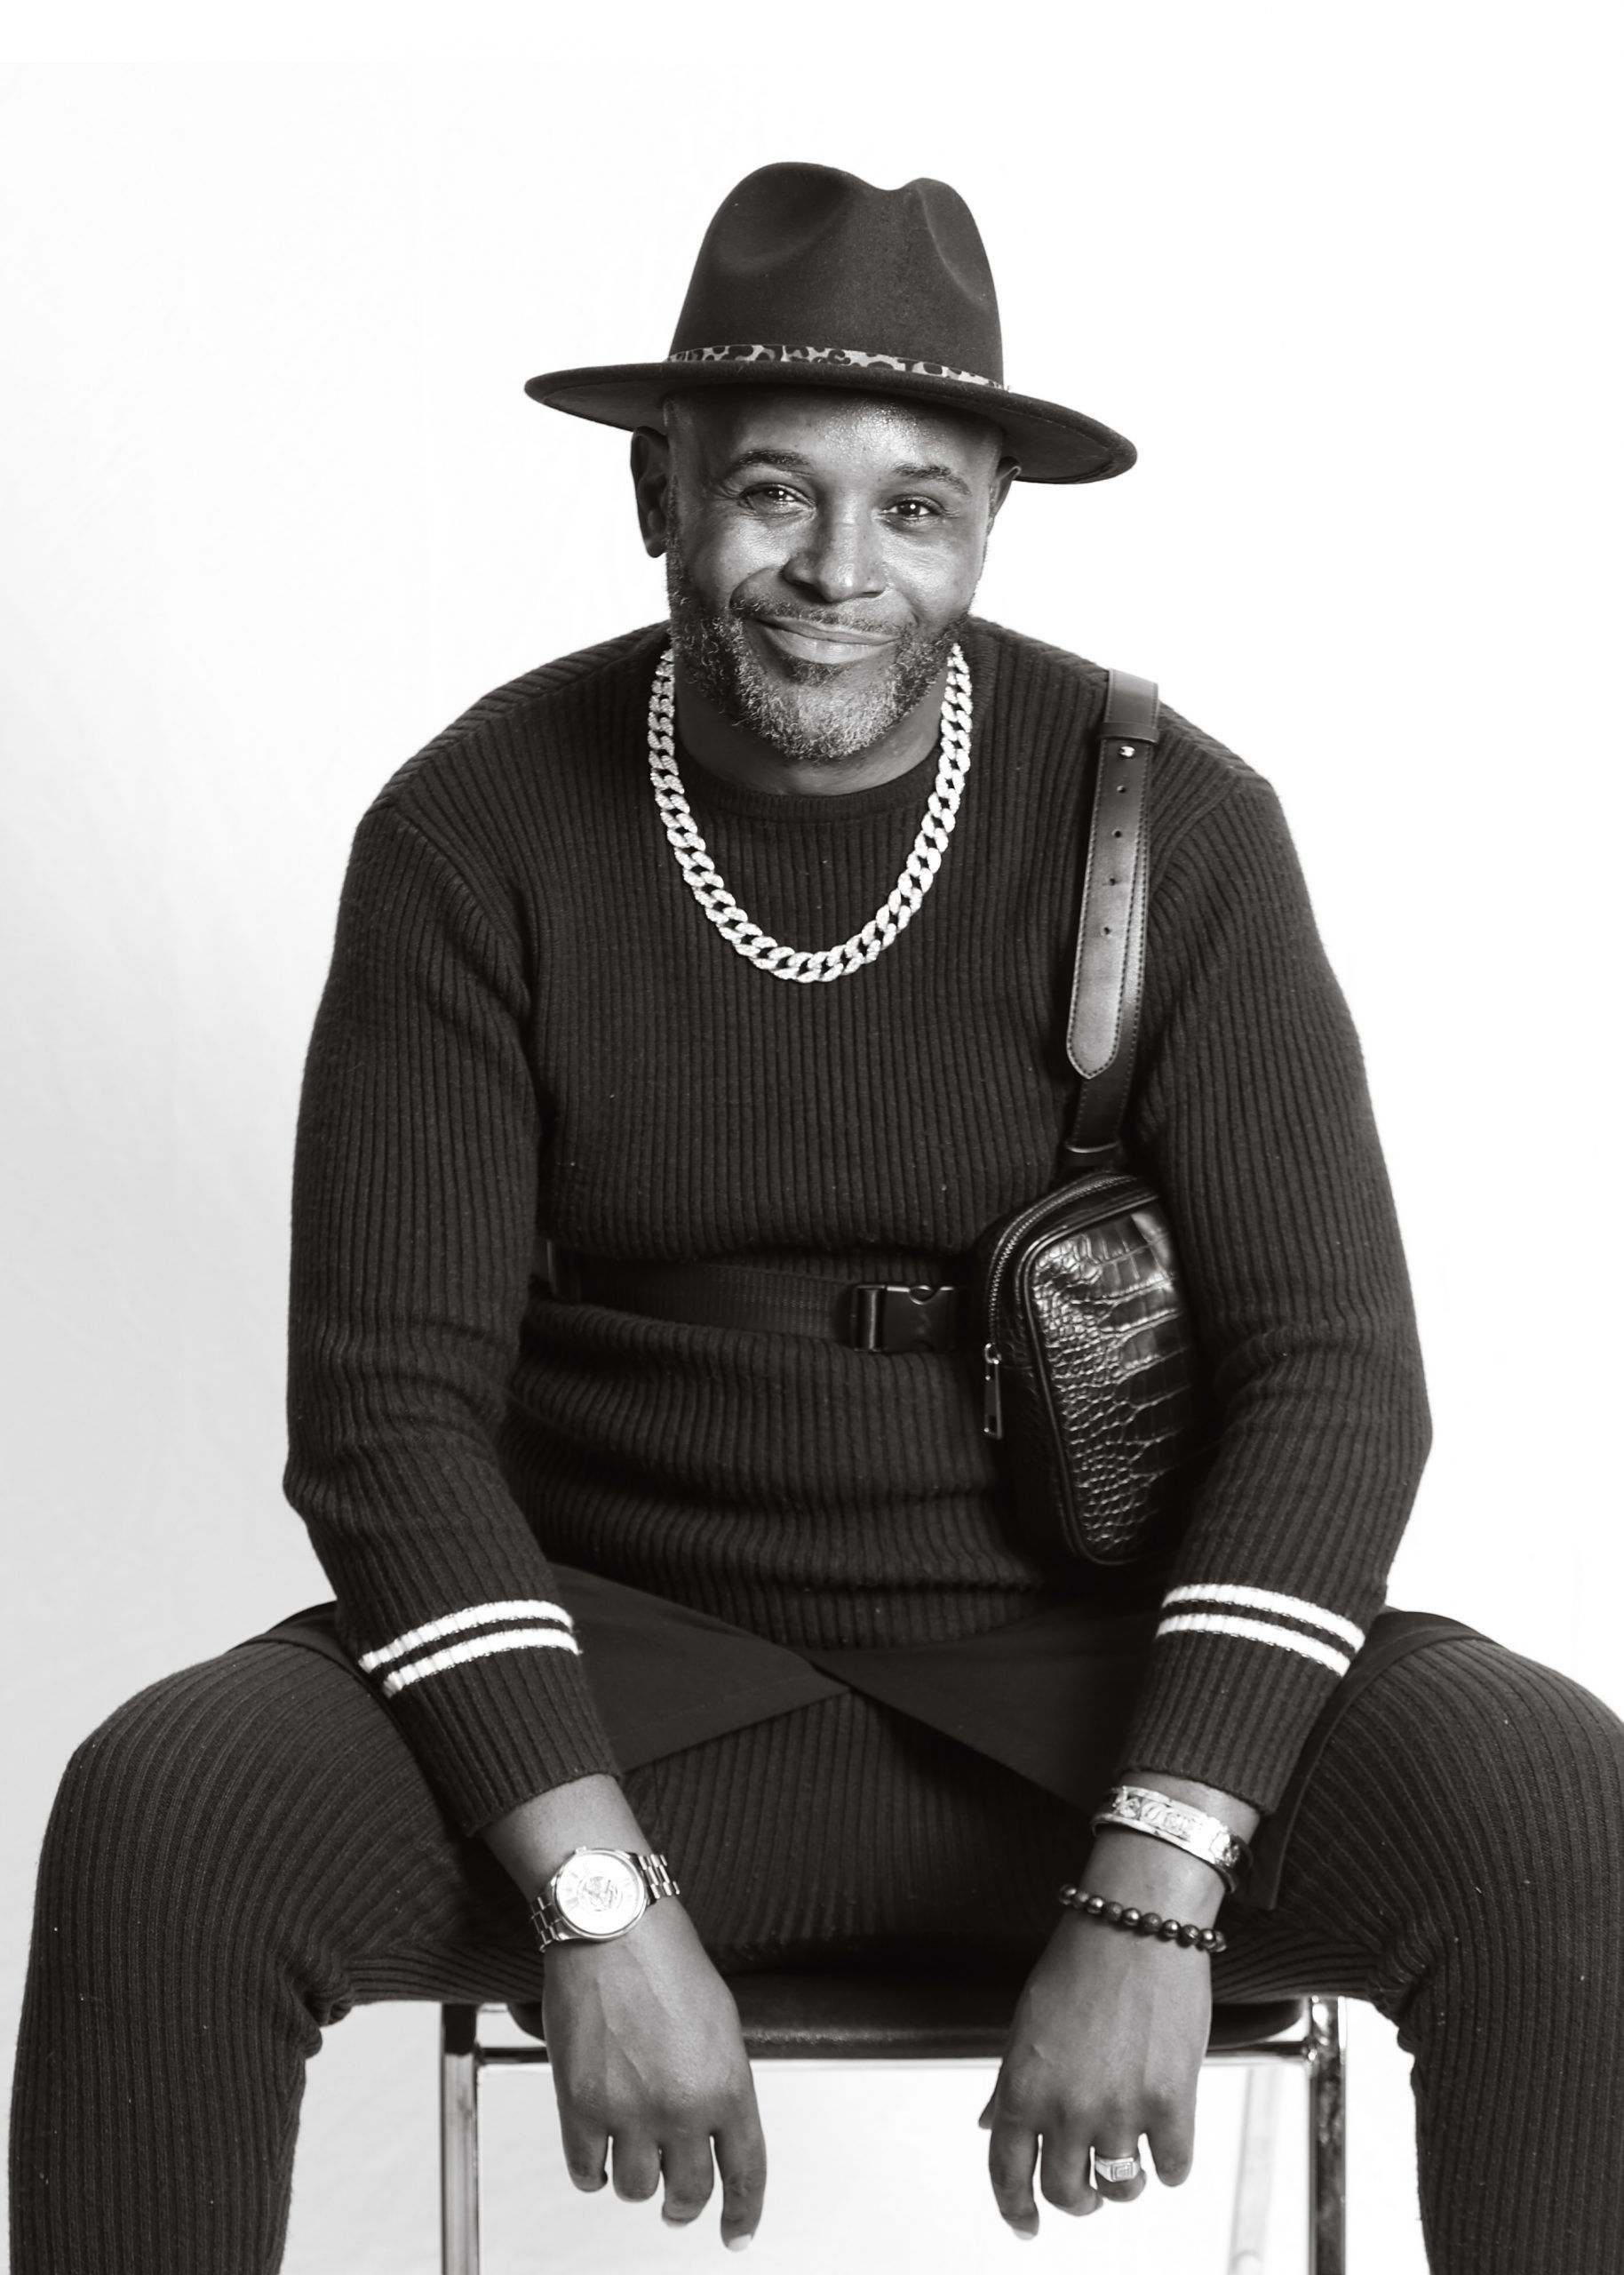 A black and white photo of a Black man wearing a hat.